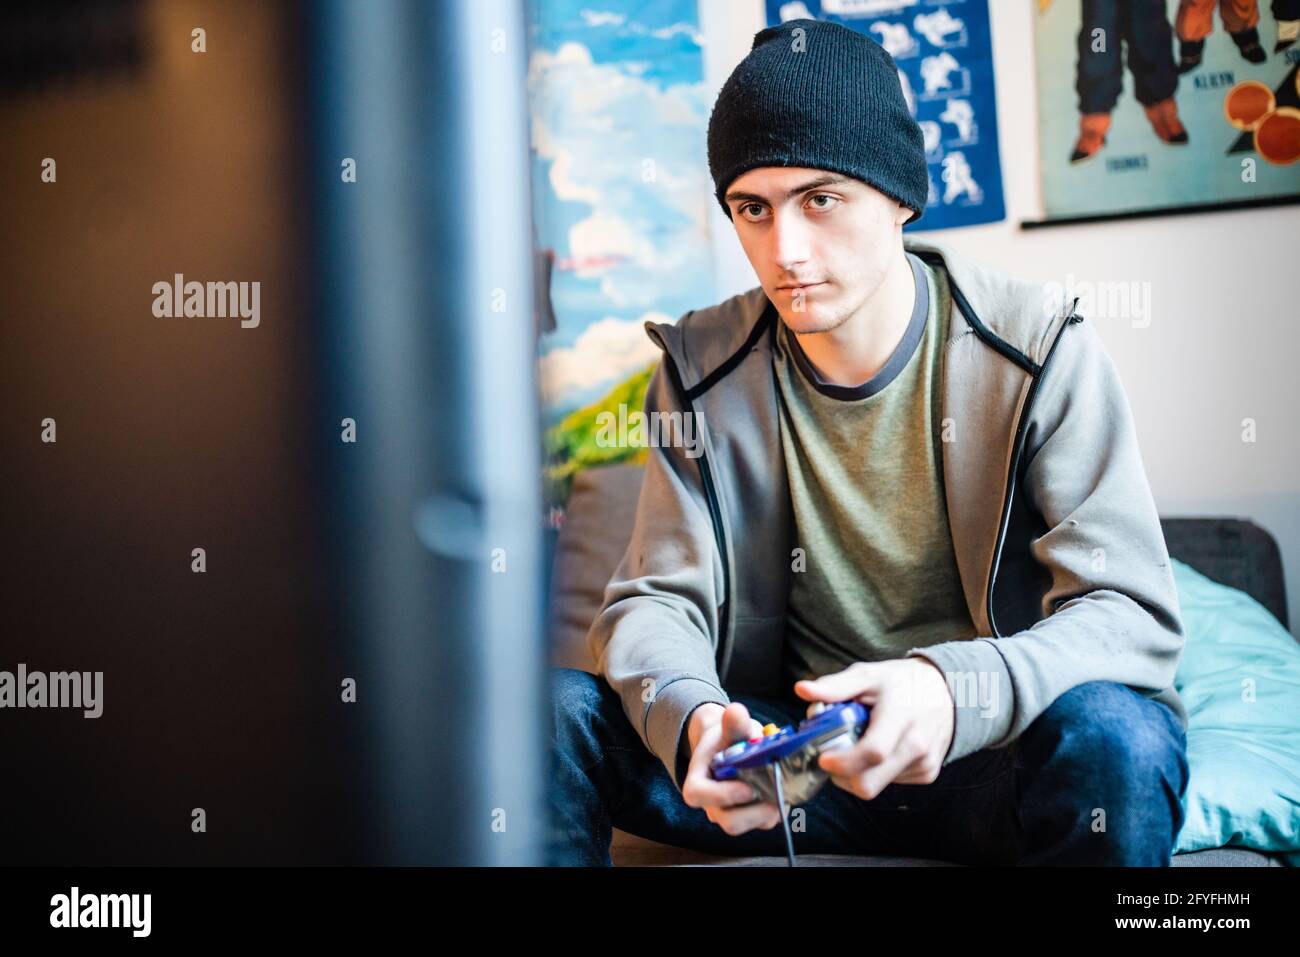 Young man playing a video game using a handheld control, France. Stock Photo